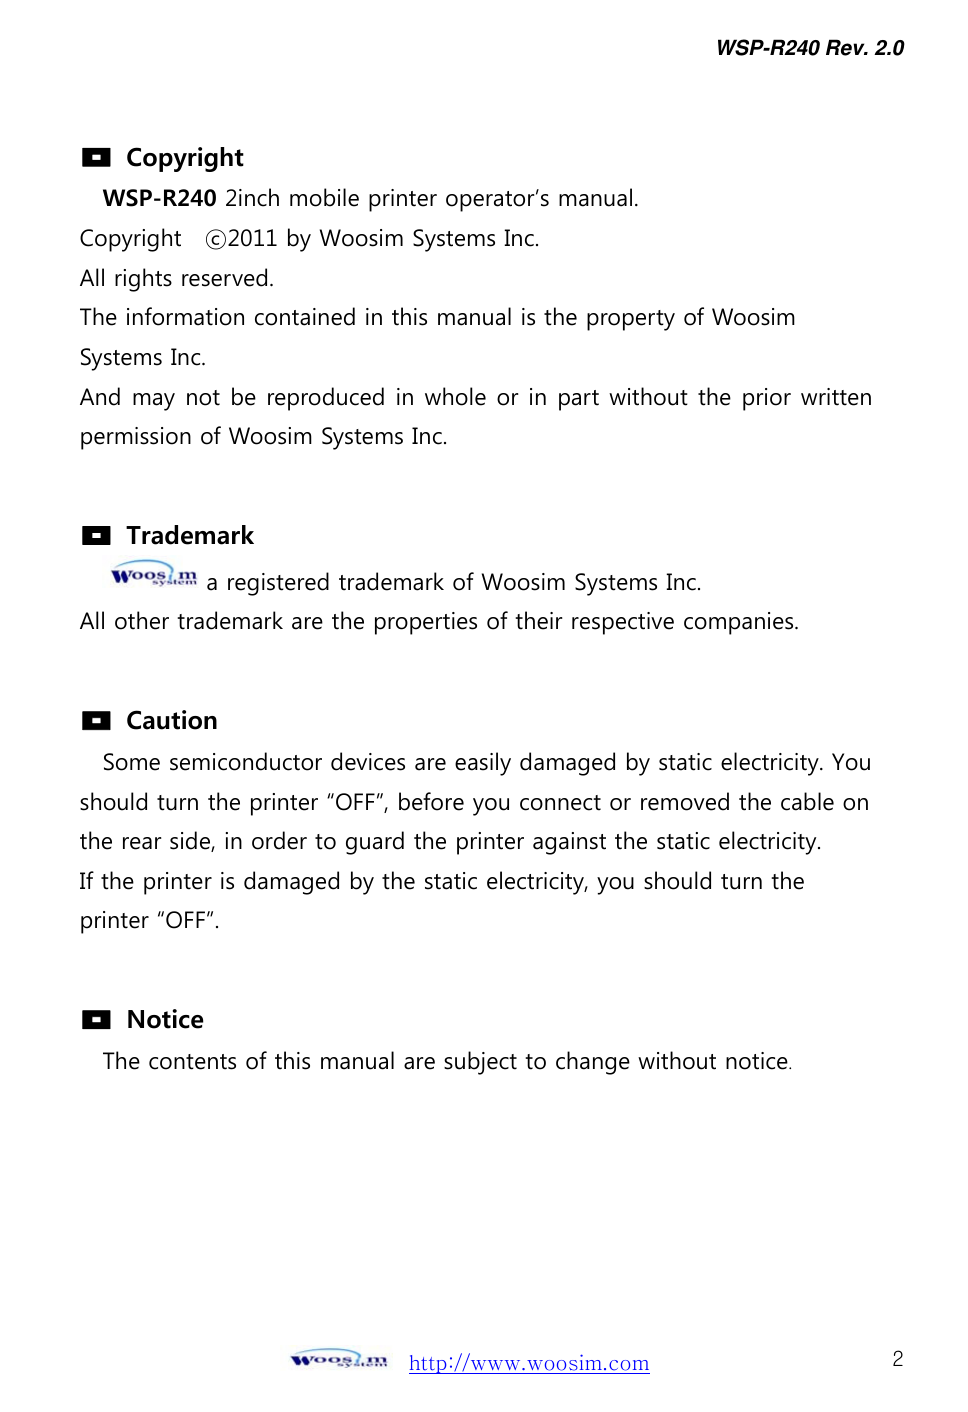 WSP-R240 Rev. 2.0     http://www.woosim.com 2                                 Copyright WSP-R240 2inch mobile printer operator’s manual. Copyright    ⓒ2011 by Woosim Systems Inc. All rights reserved. The information contained in this manual is the property of Woosim   Systems Inc. And may not be reproduced in whole or in part without the prior written permission of Woosim Systems Inc.    Trademark a registered trademark of Woosim Systems Inc. All other trademark are the properties of their respective companies.    Caution  Some semiconductor devices are easily damaged by static electricity. You should turn the printer “OFF”, before you connect or removed the cable on the rear side, in order to guard the printer against the static electricity.   If the printer is damaged by the static electricity, you should turn the printer “OFF”.    Notice The contents of this manual are subject to change without notice. 